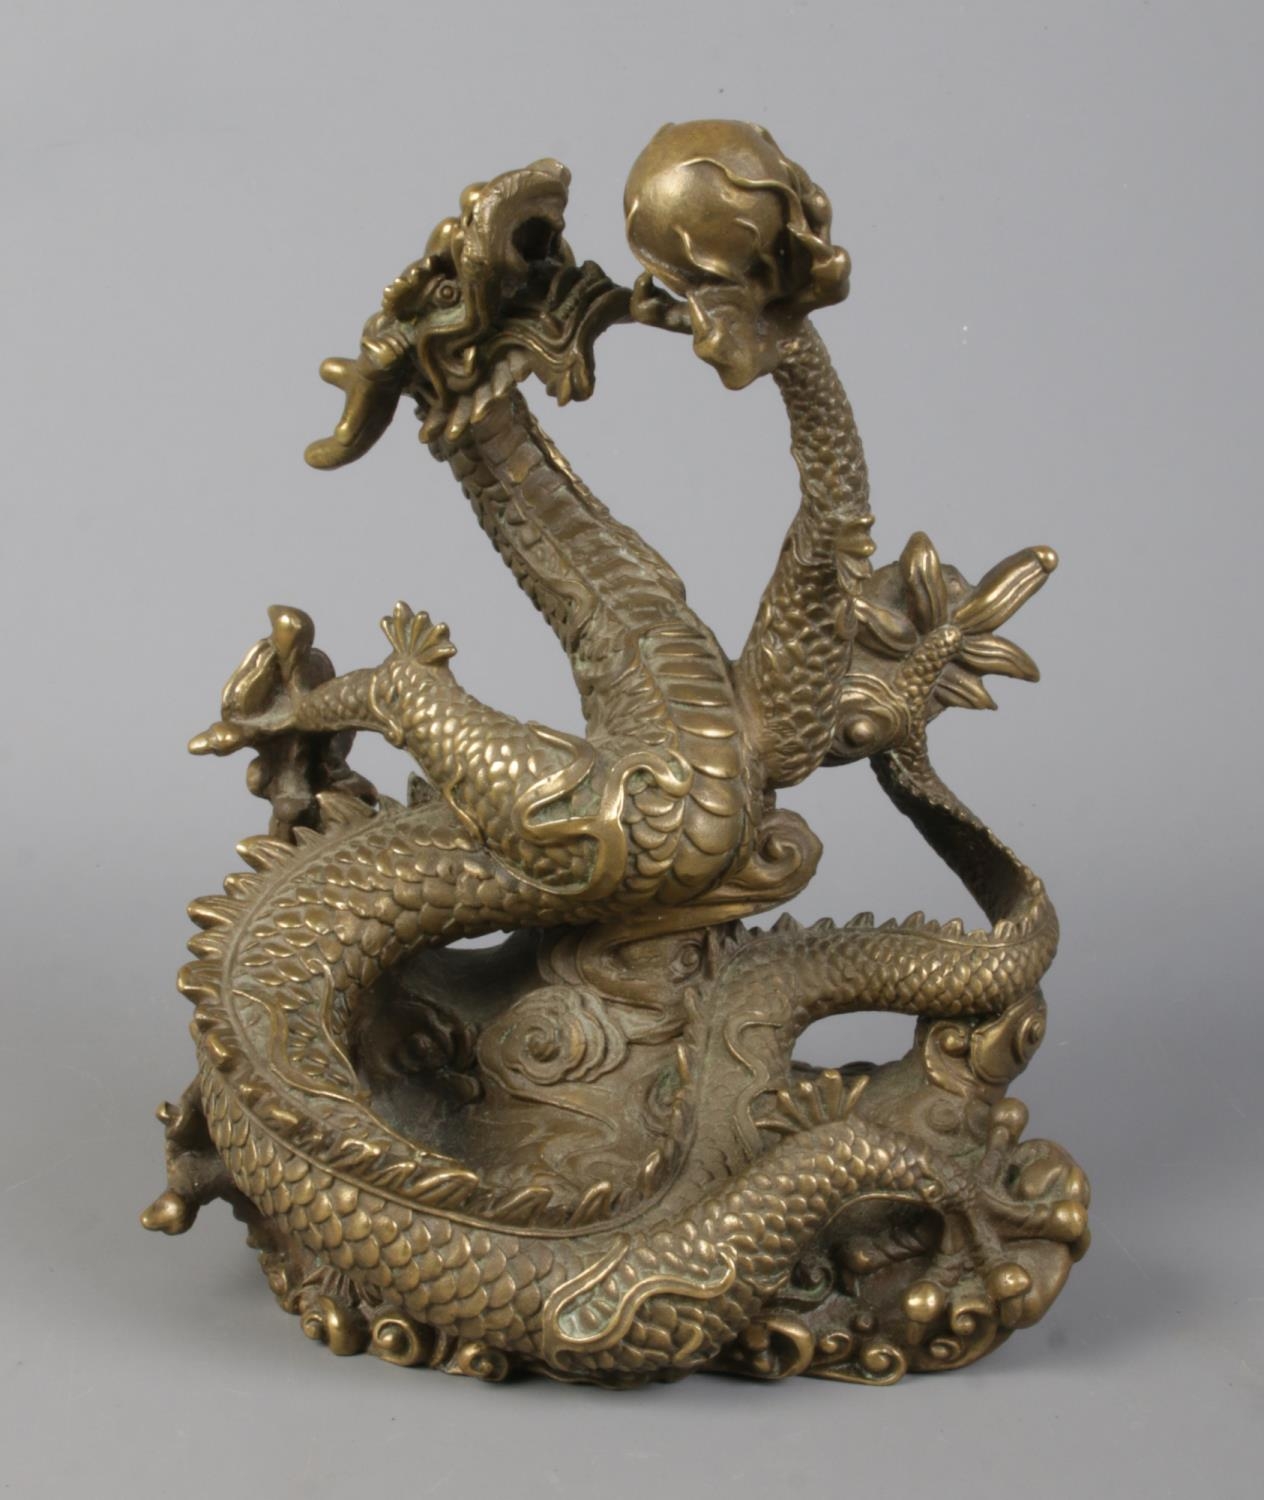 A cast bronze sculpture of a Chinese dragon holding a flaming pearl. Height 18cm. - Image 2 of 5